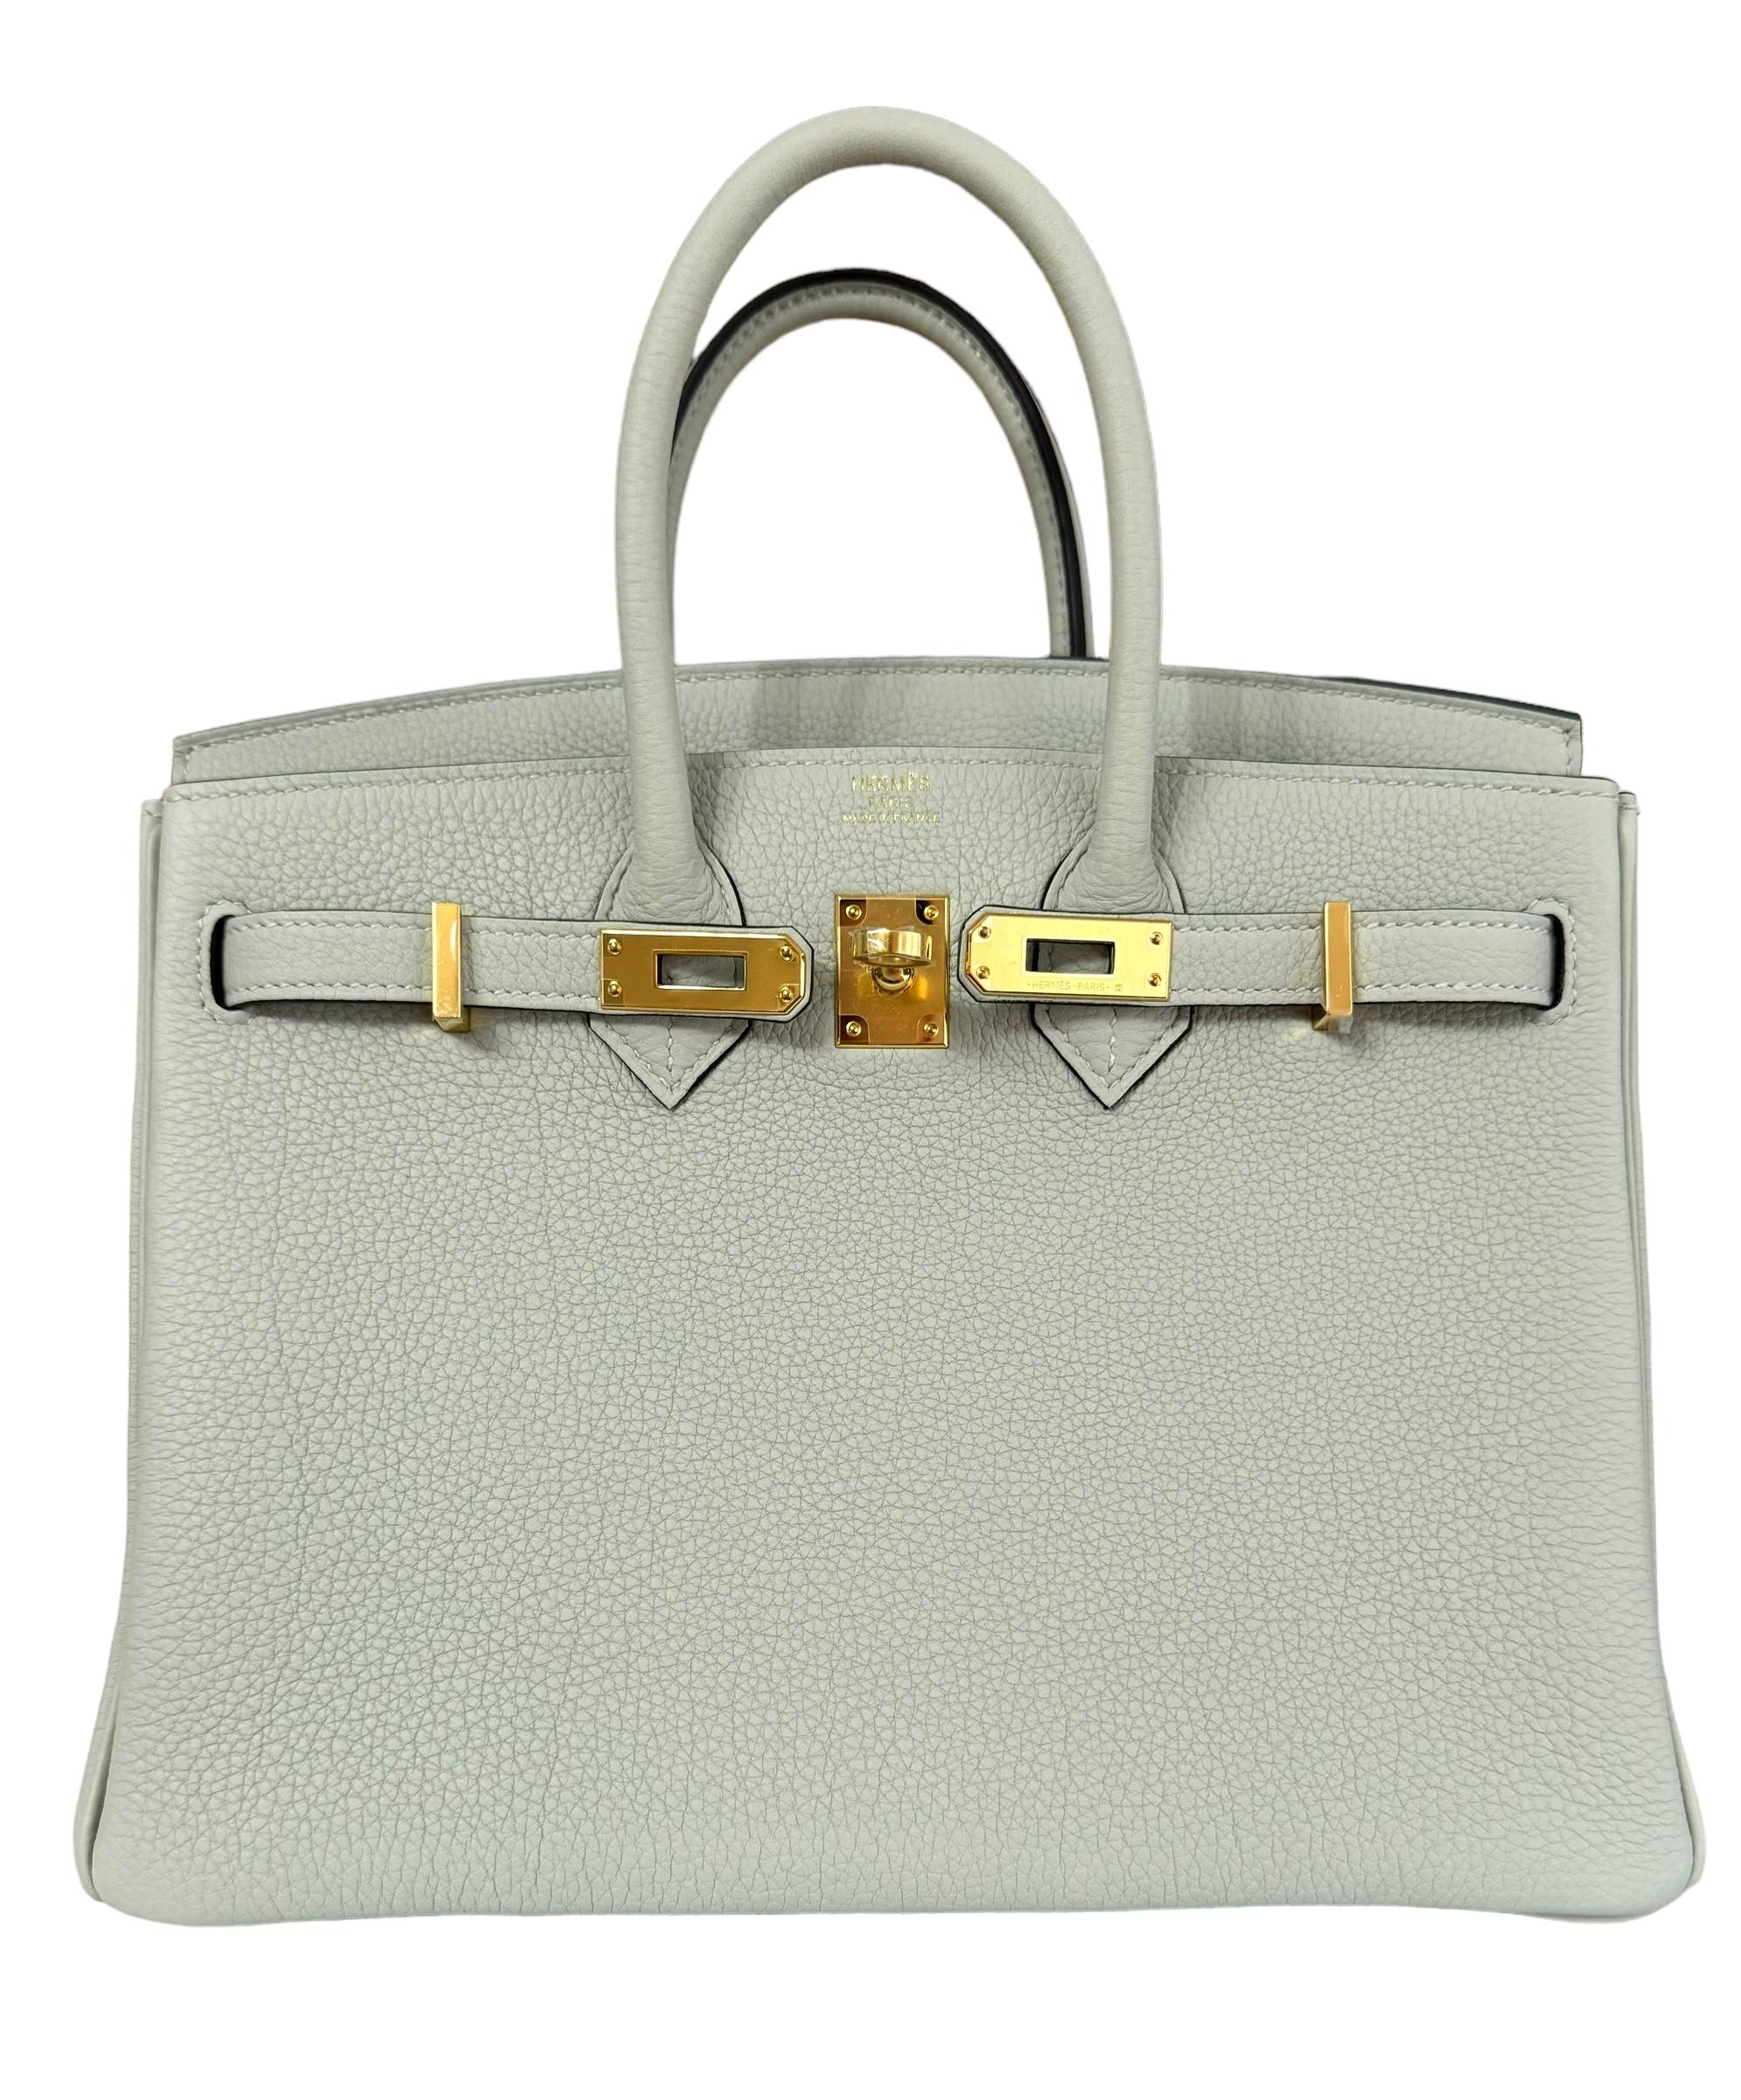 Absolutely Stunning and One The Most Coveted and Difficult to get Hermes Combos! New 2023 Hermes Birkin 25 Gris Neve Togo Leather complimented by Gold Hardware. B Stamp 2023. Includes all accessories and Box.

Shop with Confidence from Lux Addicts.